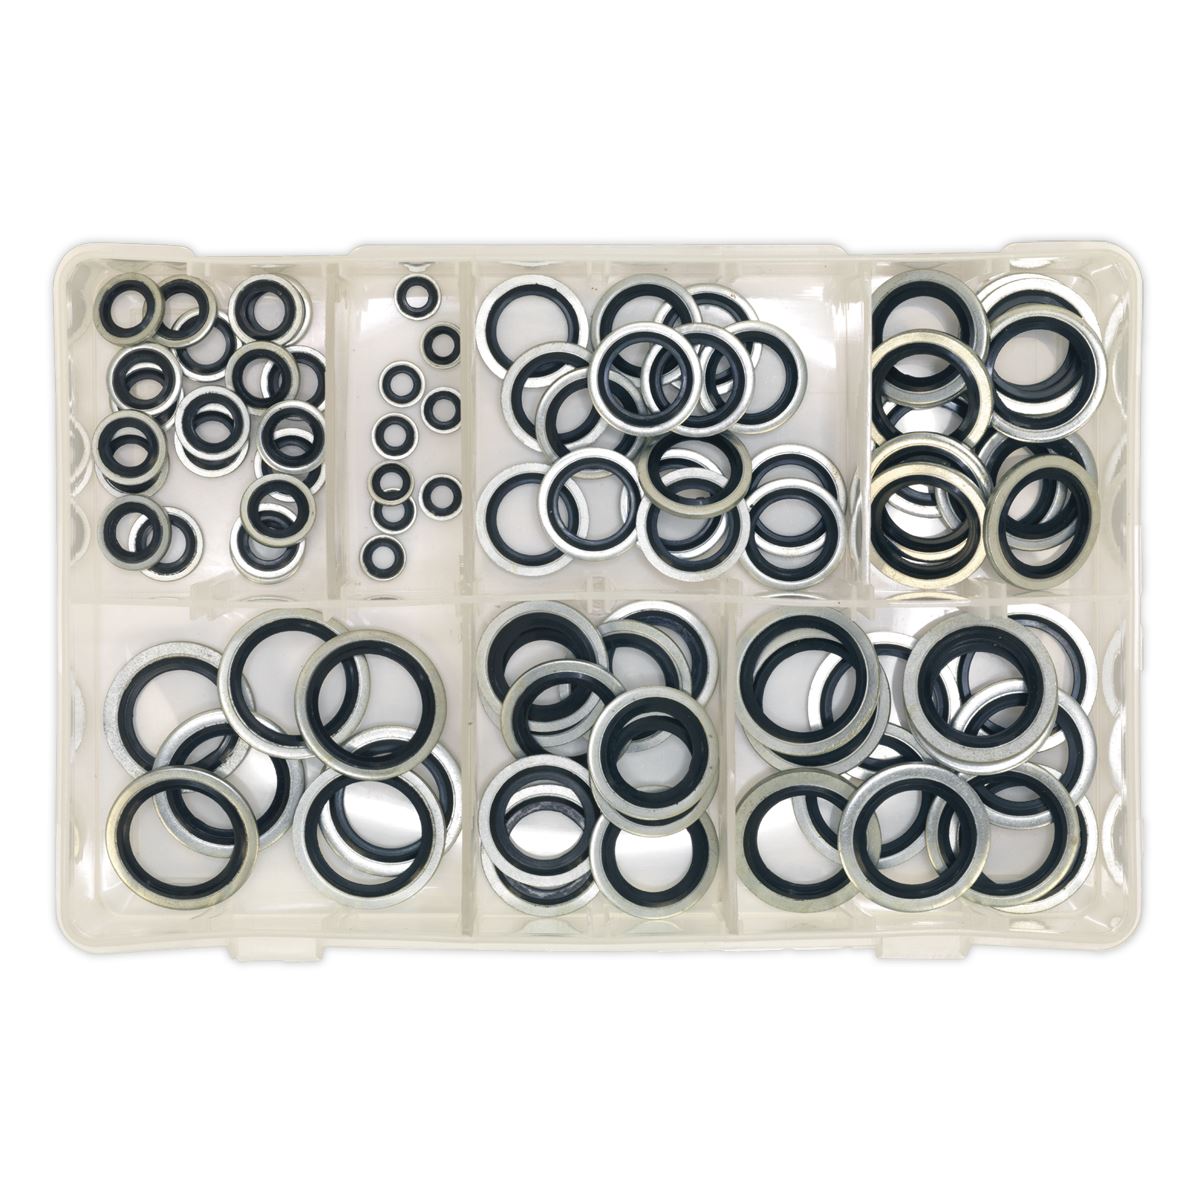 Sealey Bonded Seal (Dowty Seal) Assortment 84pc - BSP